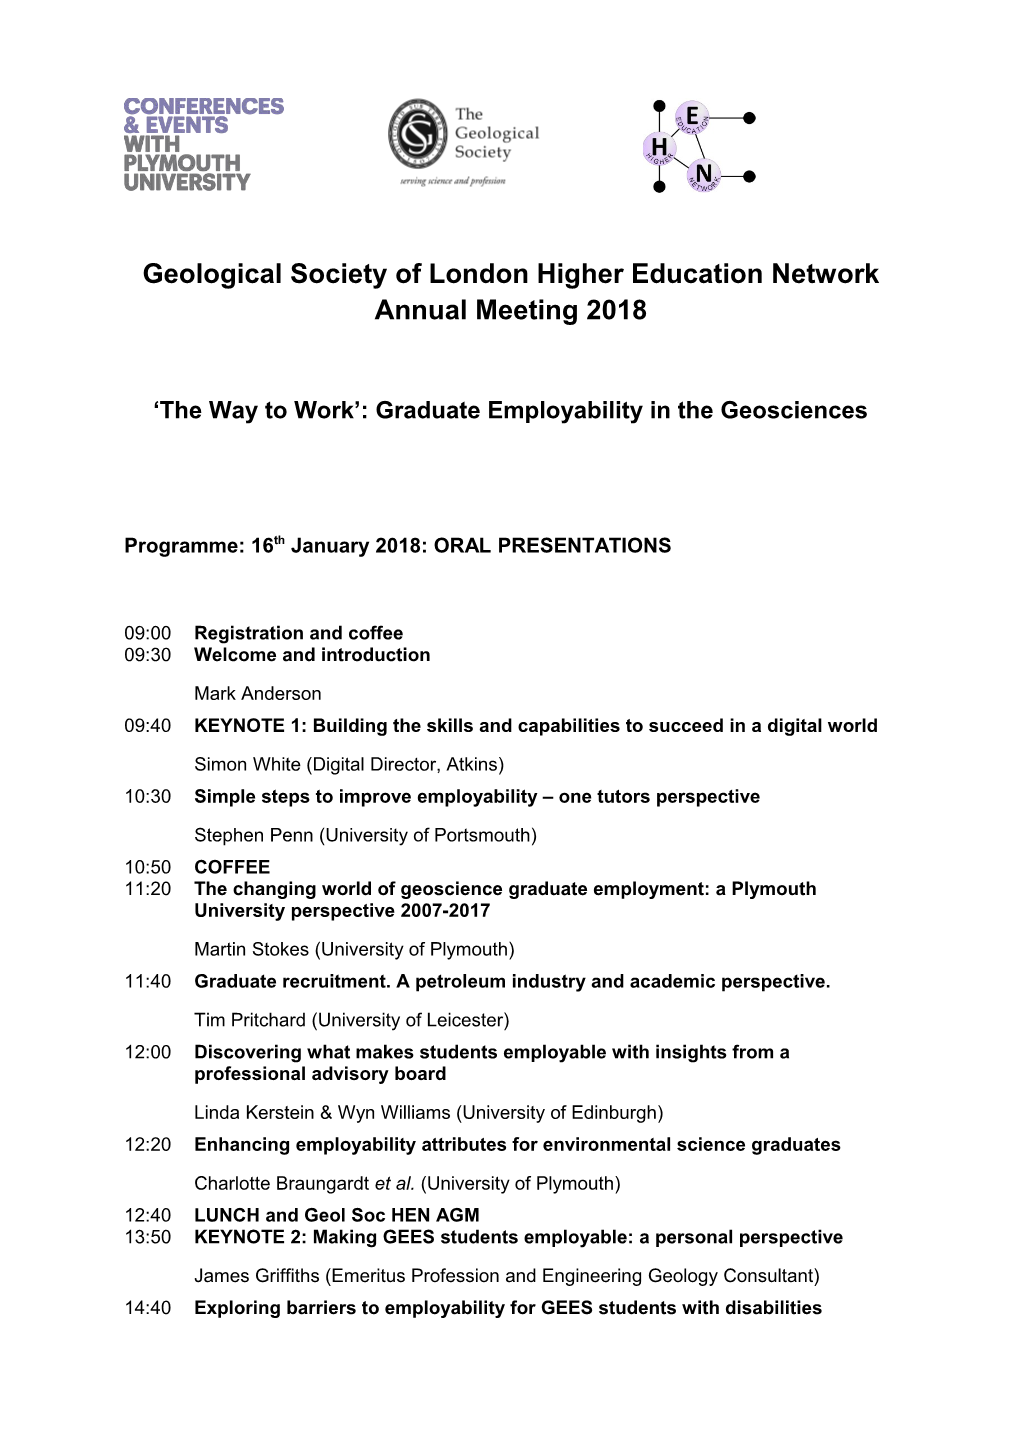 Geological Society of London Higher Education Network Annual Meeting 2018